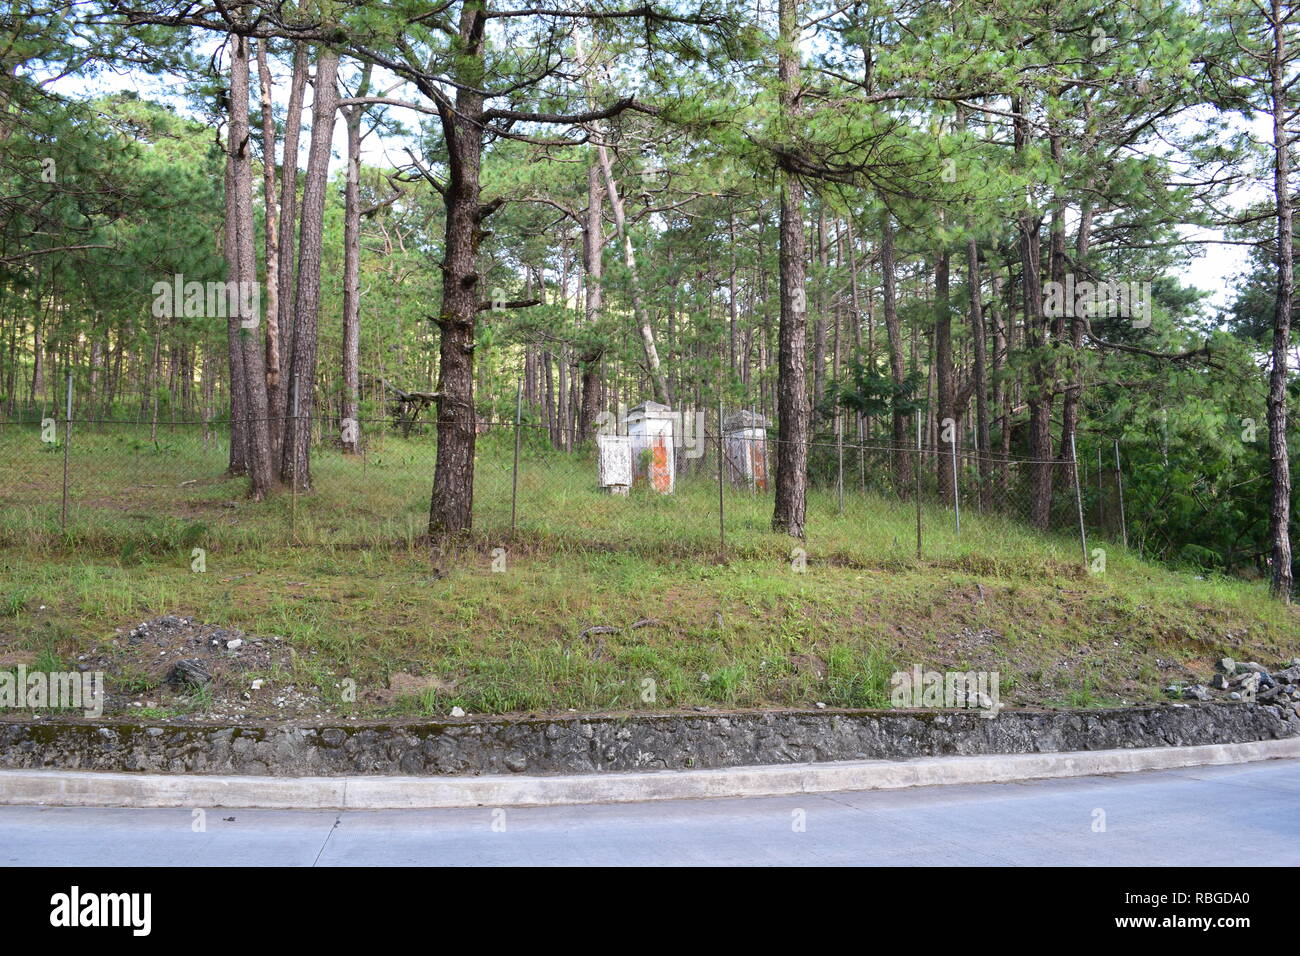 The 1st. Phil-Am, Veterans Cemetery is the final resting place for military and civilian victims of foreign wars and lay embedded in the Camp John Hay Stock Photo